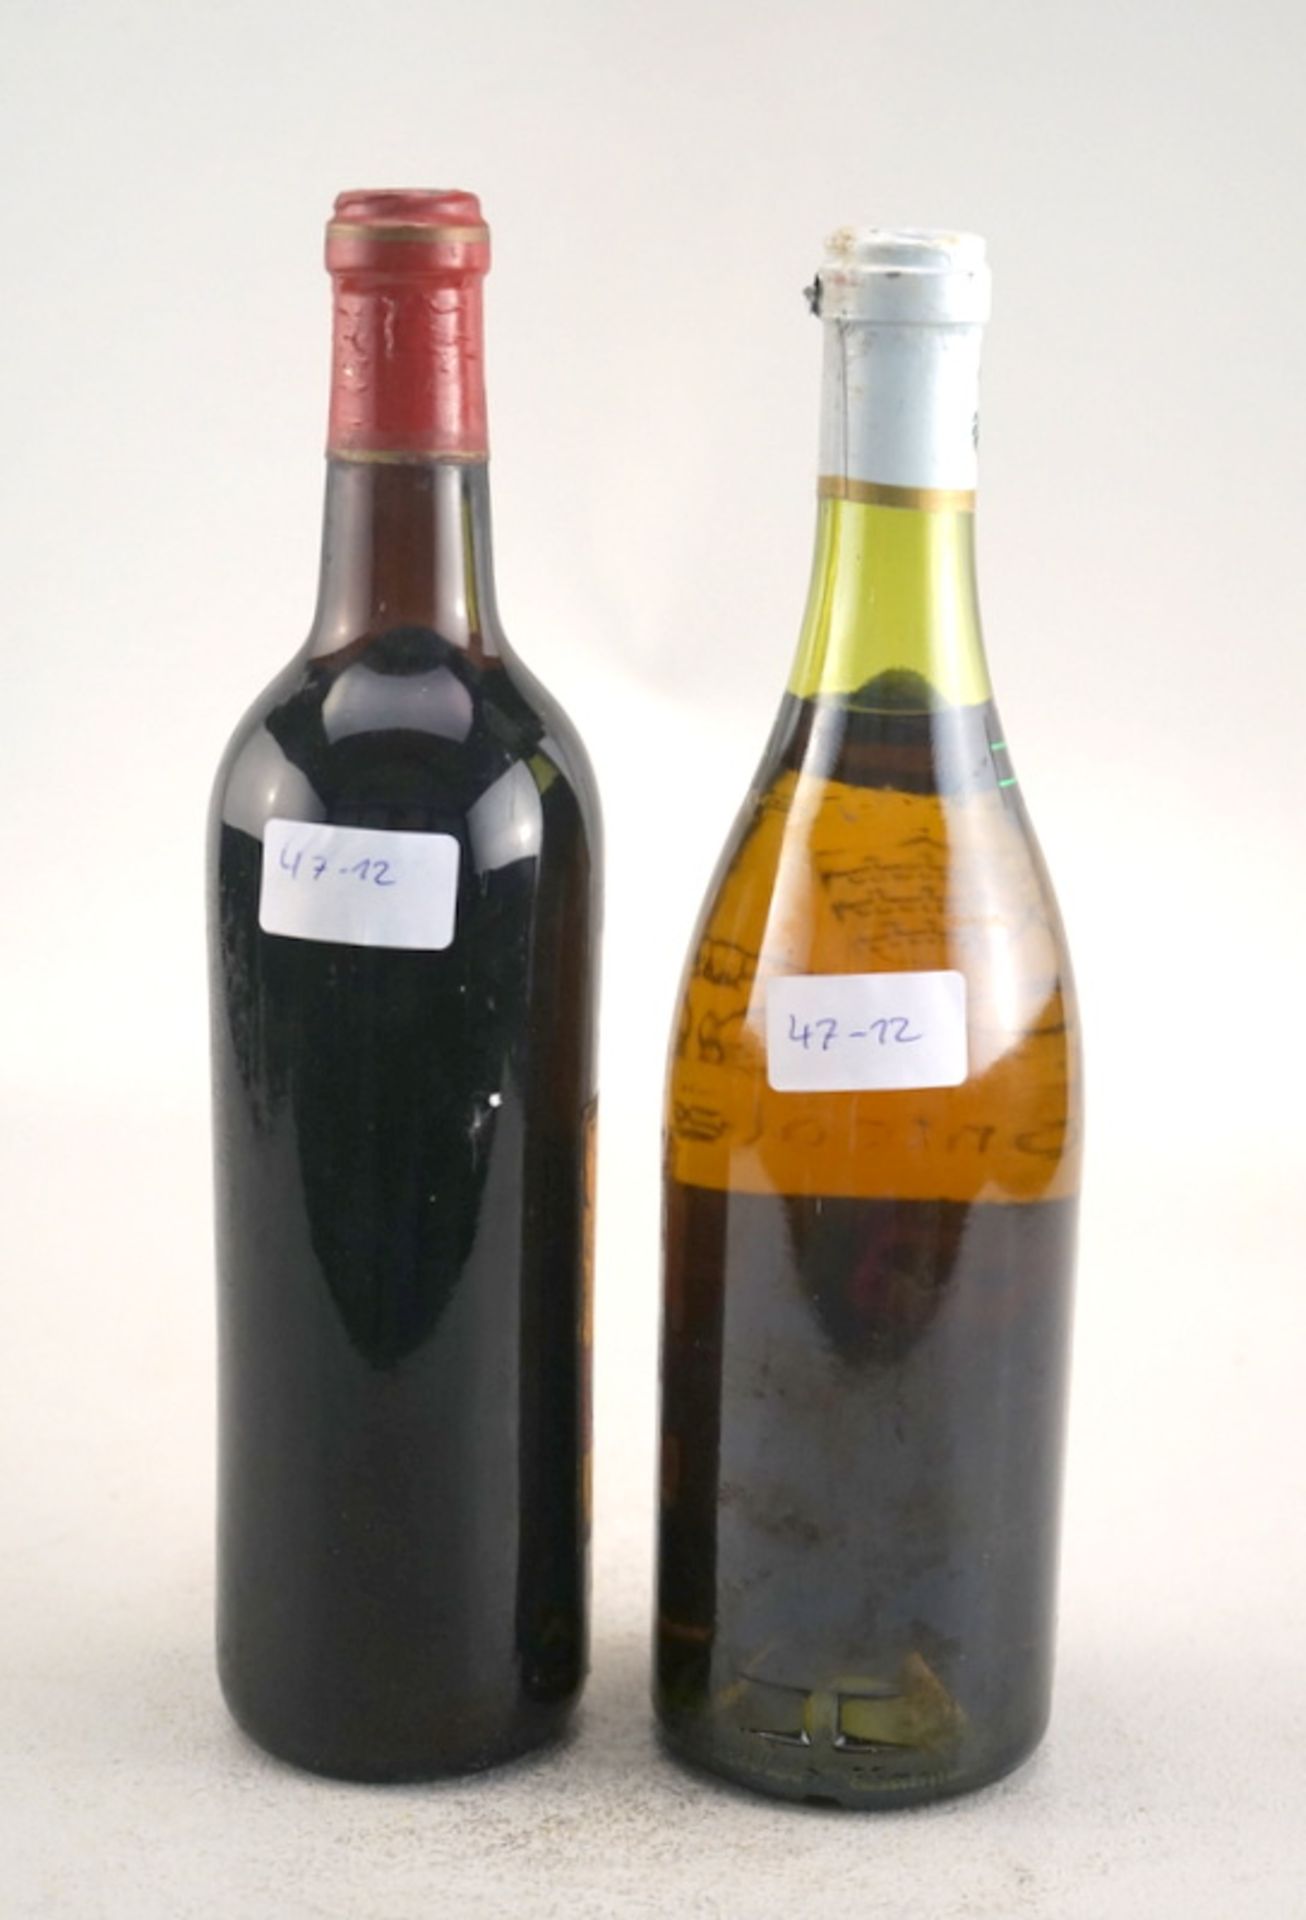 2 Weine, Châteauneuf du Pape 1982, Vino Barolo Contratto 1964 - Image 2 of 2